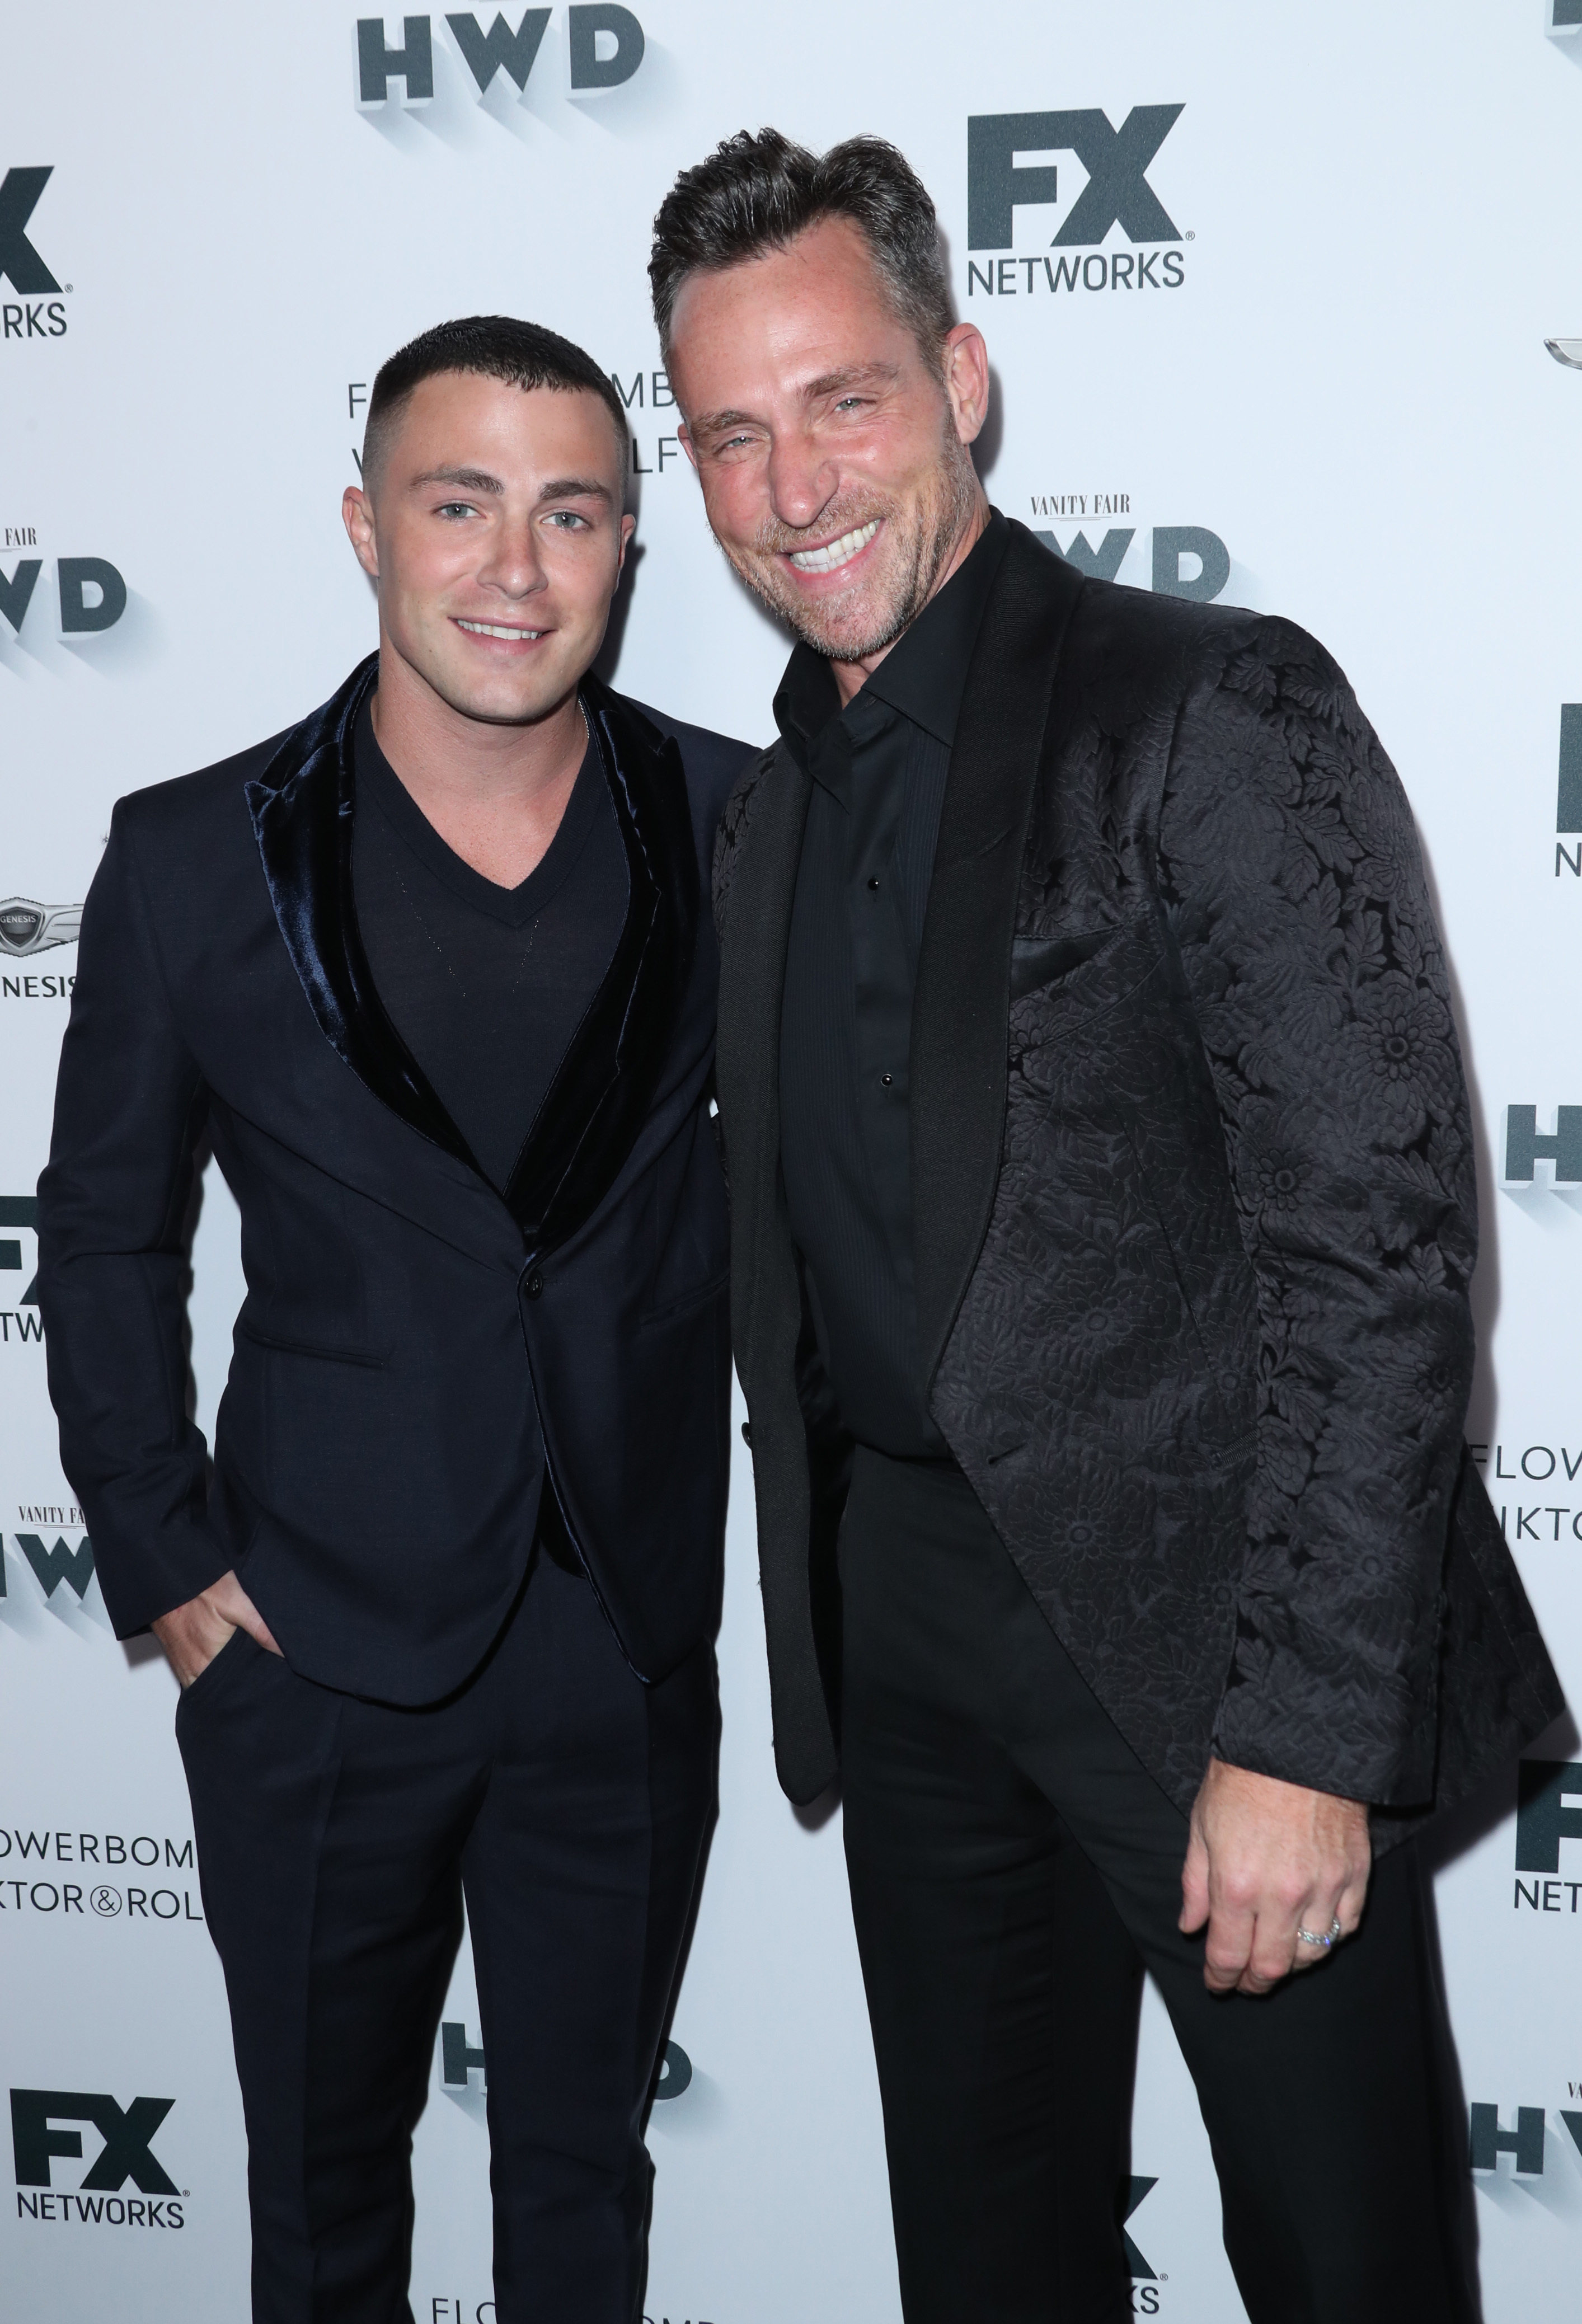 <p>"Teen Wolf" alum Colton Haynes and floral-designer-to-the-stars Jeff Leatham <a href="http://www.wonderwall.com/news/colton-haynes-jeff-leatham-engaged-photos-cher-help-1962440.article">got engaged</a> in March 2017, <a href="http://www.wonderwall.com/celebrity/couples/celebrity-weddings-2017-3006680.gallery?photoId=1015066">got married</a> (Kris Jenner officiated!) just seven months later, then <a href="https://www.wonderwall.com/news/colton-haynes-files-divorce-husband-six-months-3014161.article">filed for divorce</a> just six months after that -- only to reconcile in time for their one-year wedding anniversary... then split again. Colton told People magazine that mutual friends (including Serena Williams) had tried to set them up four years before they met. But at the time, Colton was living in Vancouver shooting "Arrow" and Jeff was based in France, where he's the artistic director at the Four Season Georges V. "We were going to meet up for a date but we ended up not being able to. And then years went by," Colton explained. Then something crazy happened: In January 2017, Jeff recognized the actor at 7 a.m. in an airport lounge in Paris (Colton had been in town for a fashion show) and approached him. "I hit him in the back with my Louis Vuitton bag and he turned around and I said, 'Hey, Colton.' And he said, 'Oh hey, Jeff.' And we actually fell in love," Jeff told People. They realized they were on the same flight to Los Angeles and sitting just three rows apart. "We passed Post-It notes back and forth and ended up exchanging numbers," Colton shared. "He wanted me to cuddle with him on the plane and I said, 'No, you're moving too fast.' But eventually he just pulled me down and we cuddled. I got home and a day later I got this huge delivery of flowers delivered to my house with a card that said, 'What movies are made of.'"</p>